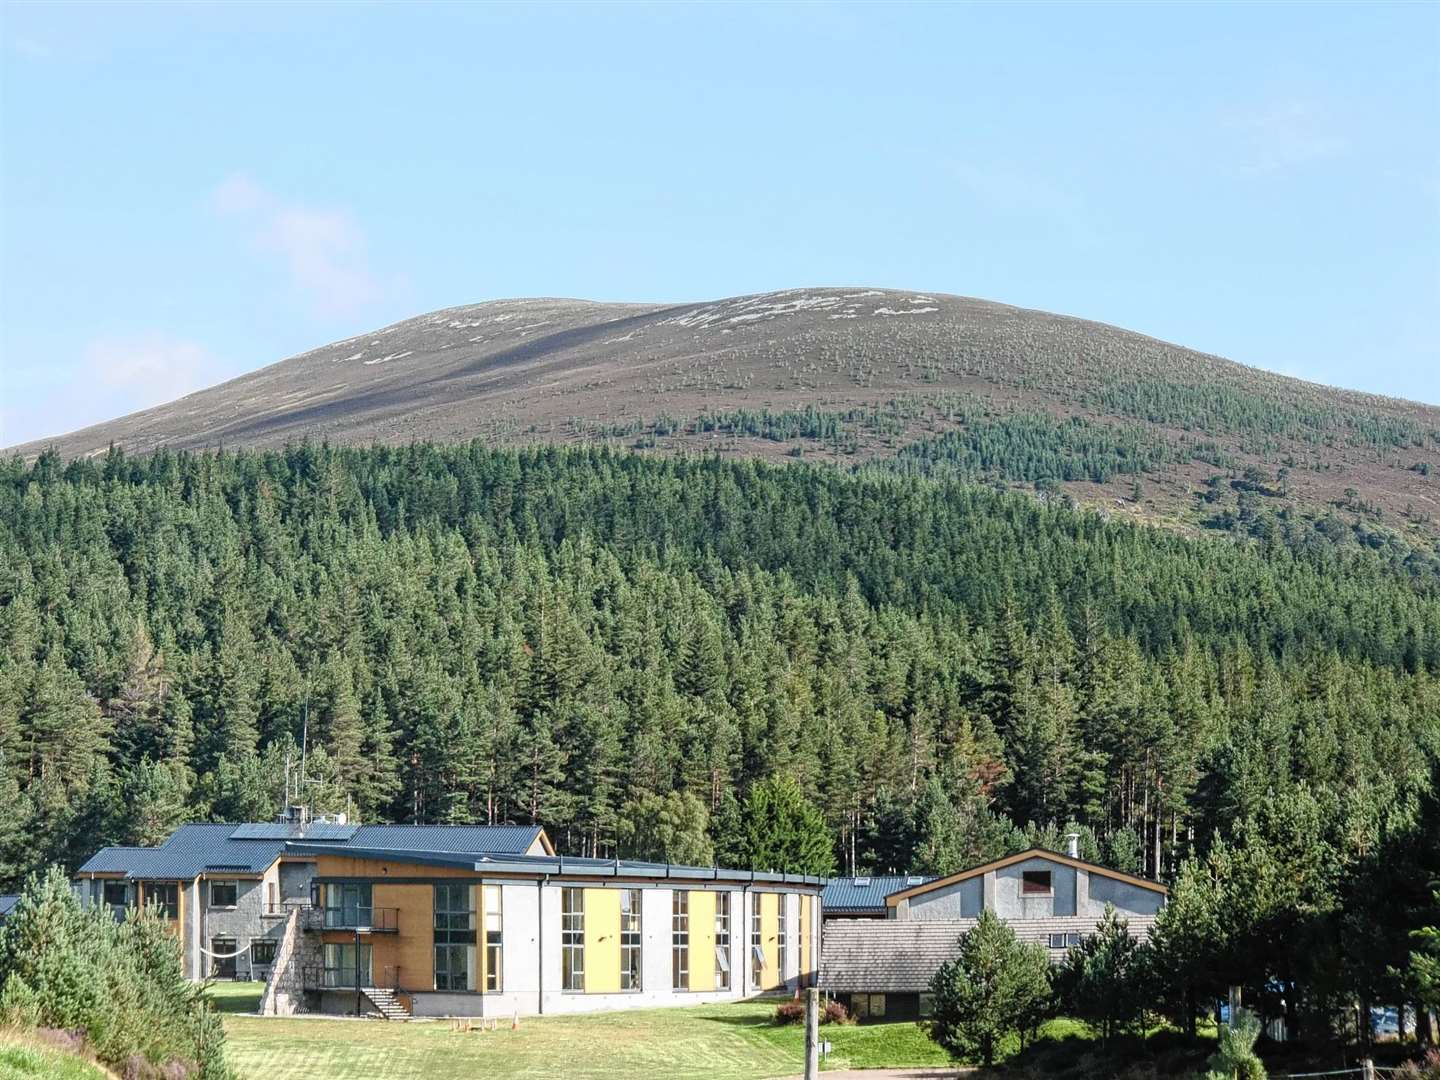 Glenmore Lodge with Meall a' Bhuachaille behind.